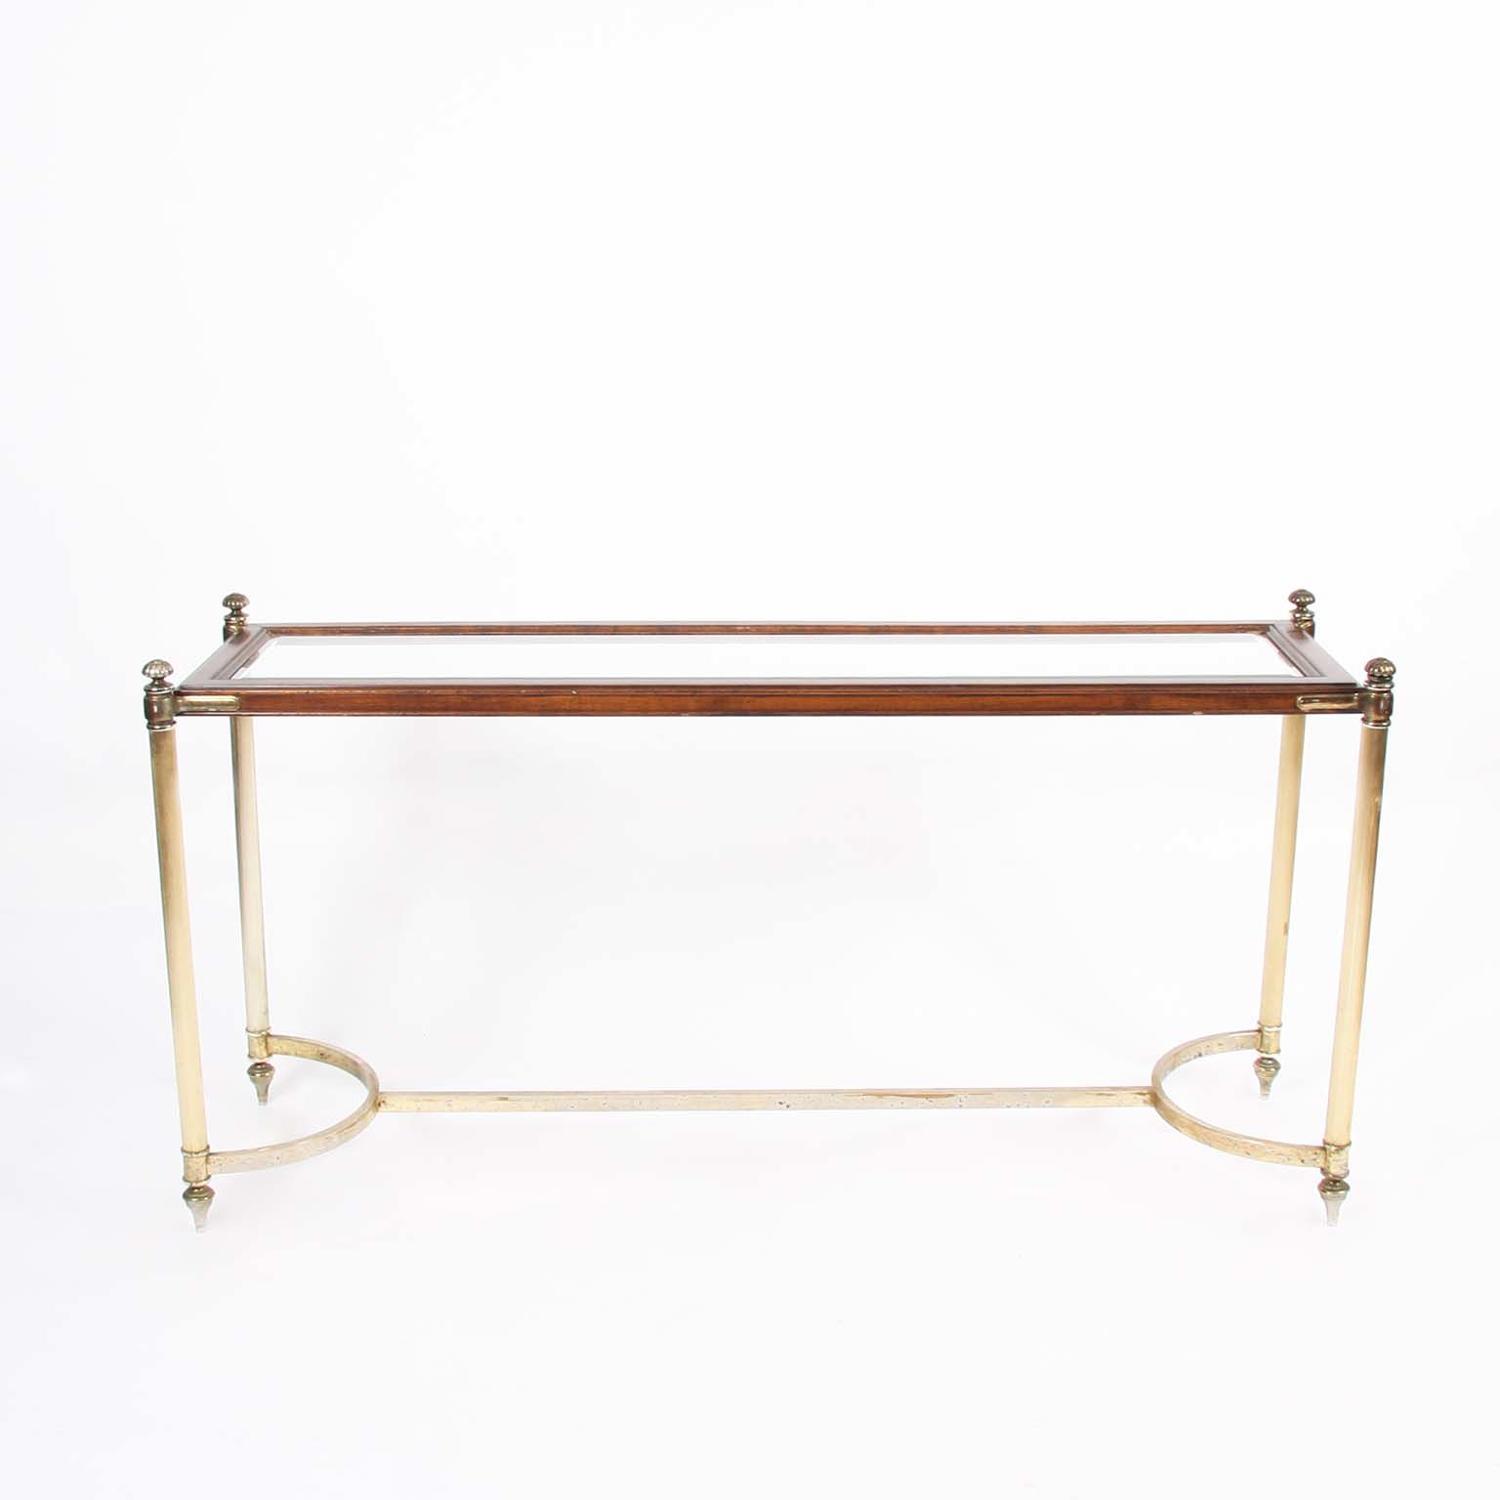 Gilt Metal and Wood Console Table with Glass Shelves